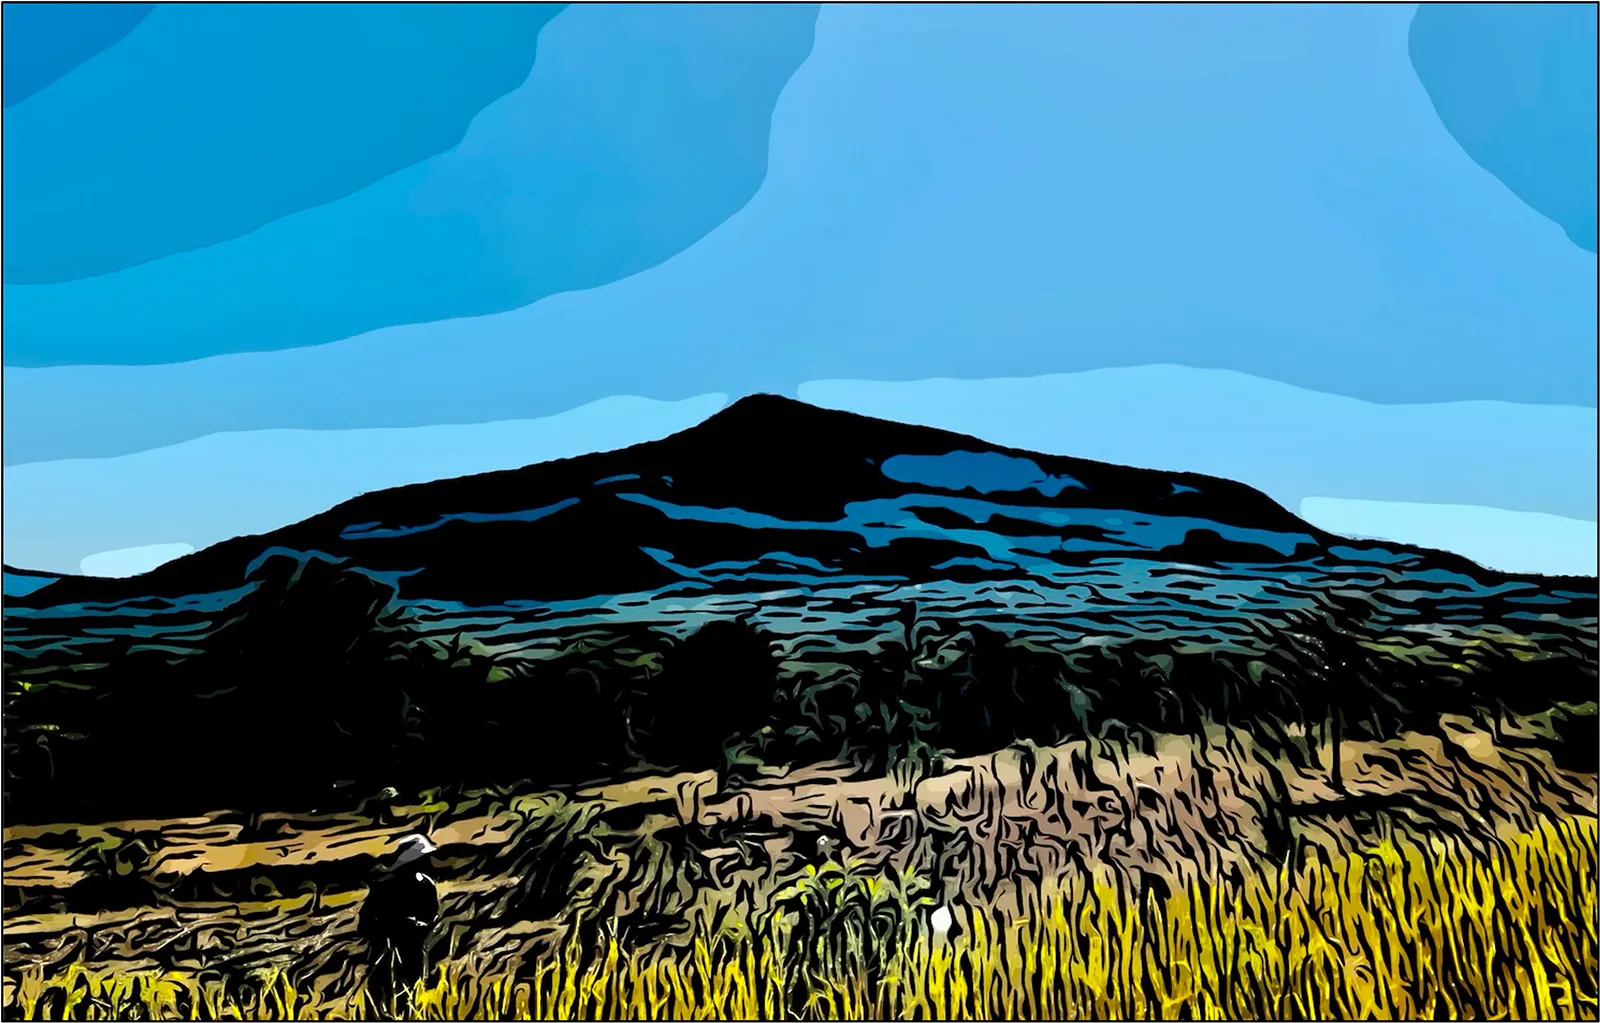 An illustration of a mountain in Zimbabwe, with fields at the foot.